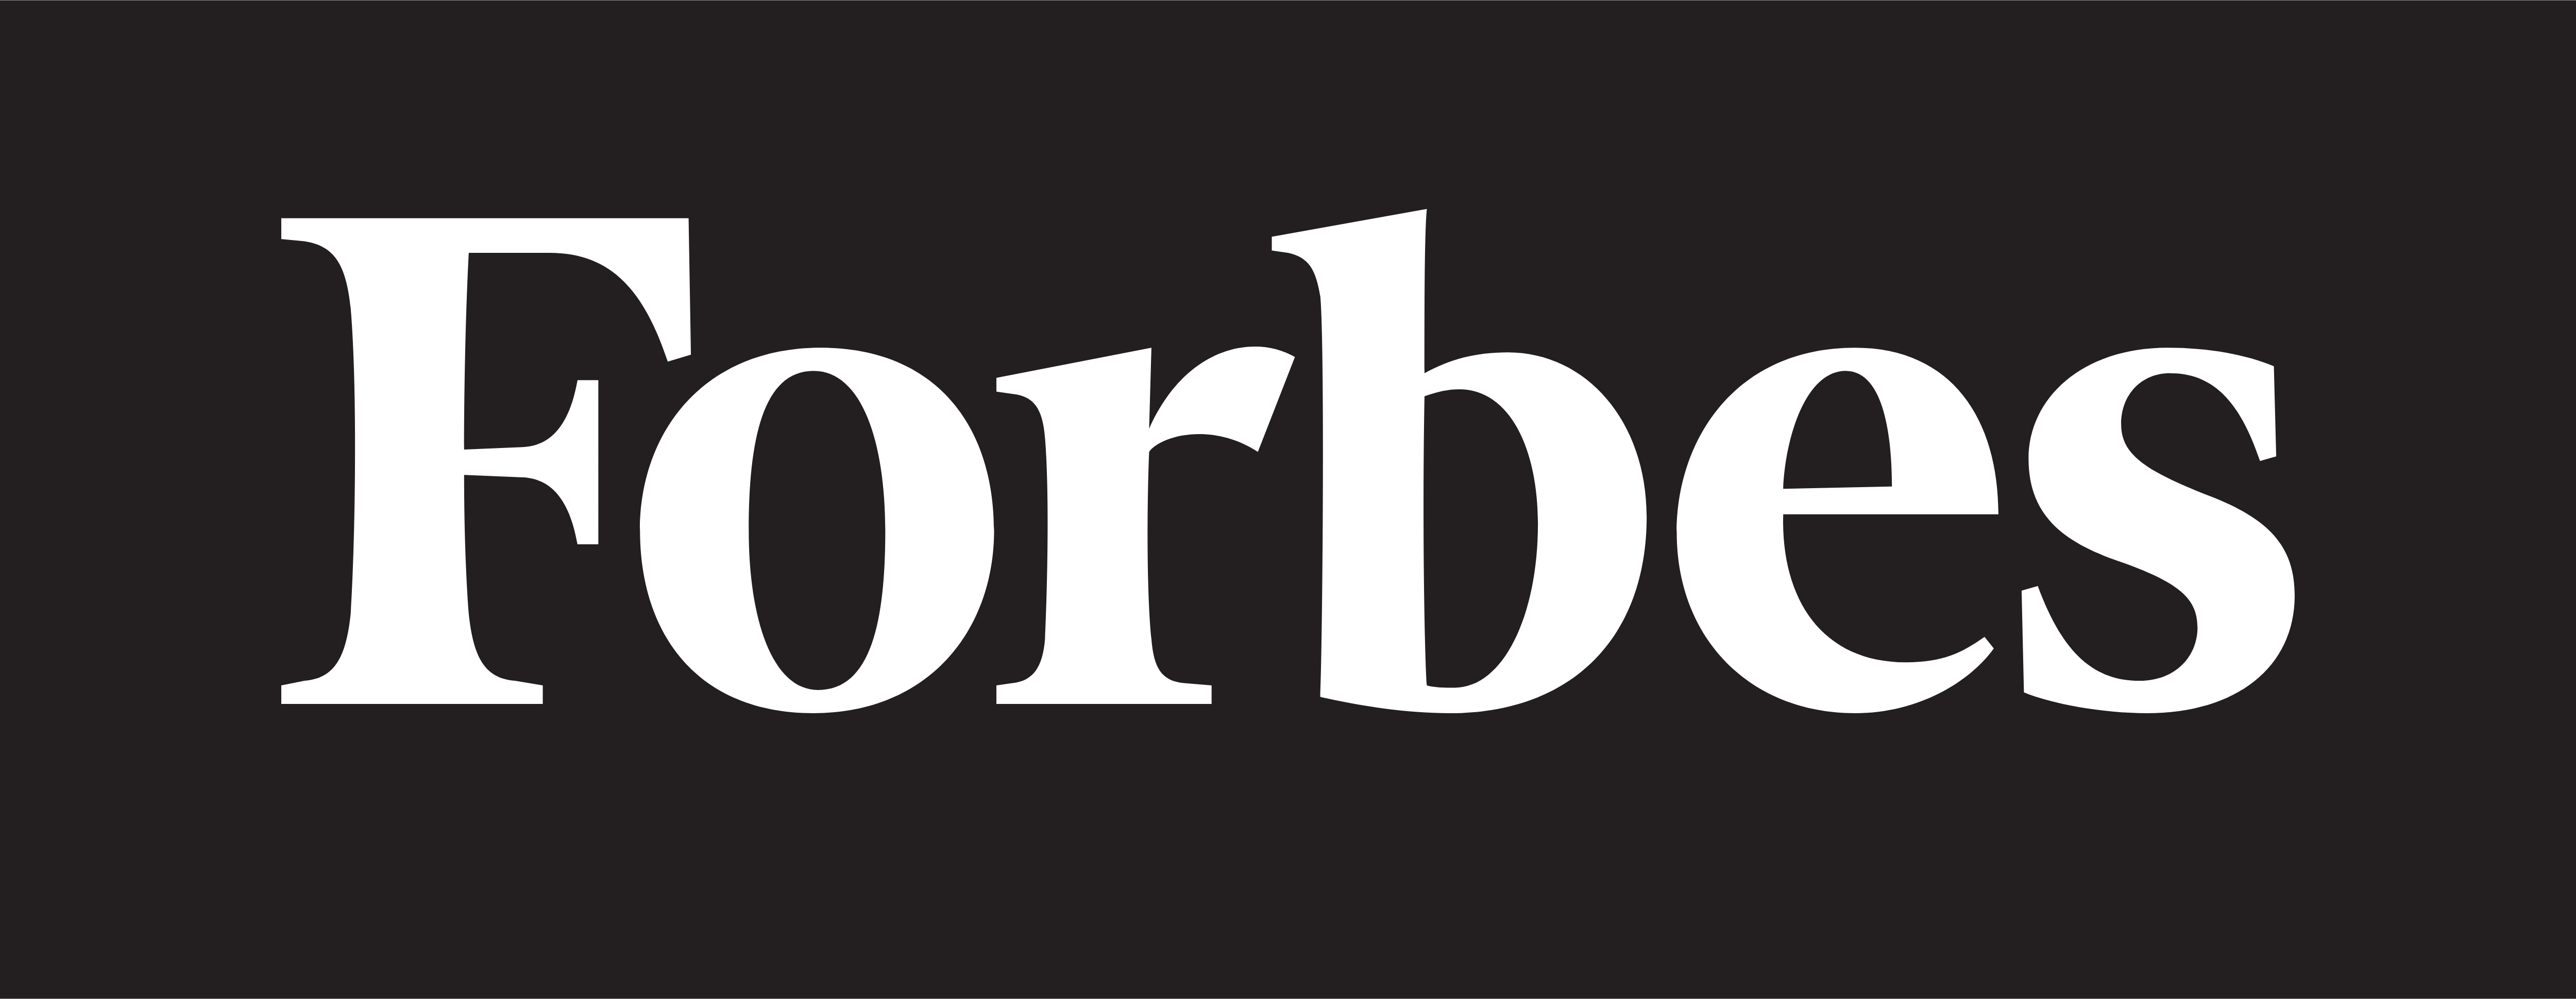 Forbes logo article featuring TO112 Anti-Humectant Spray